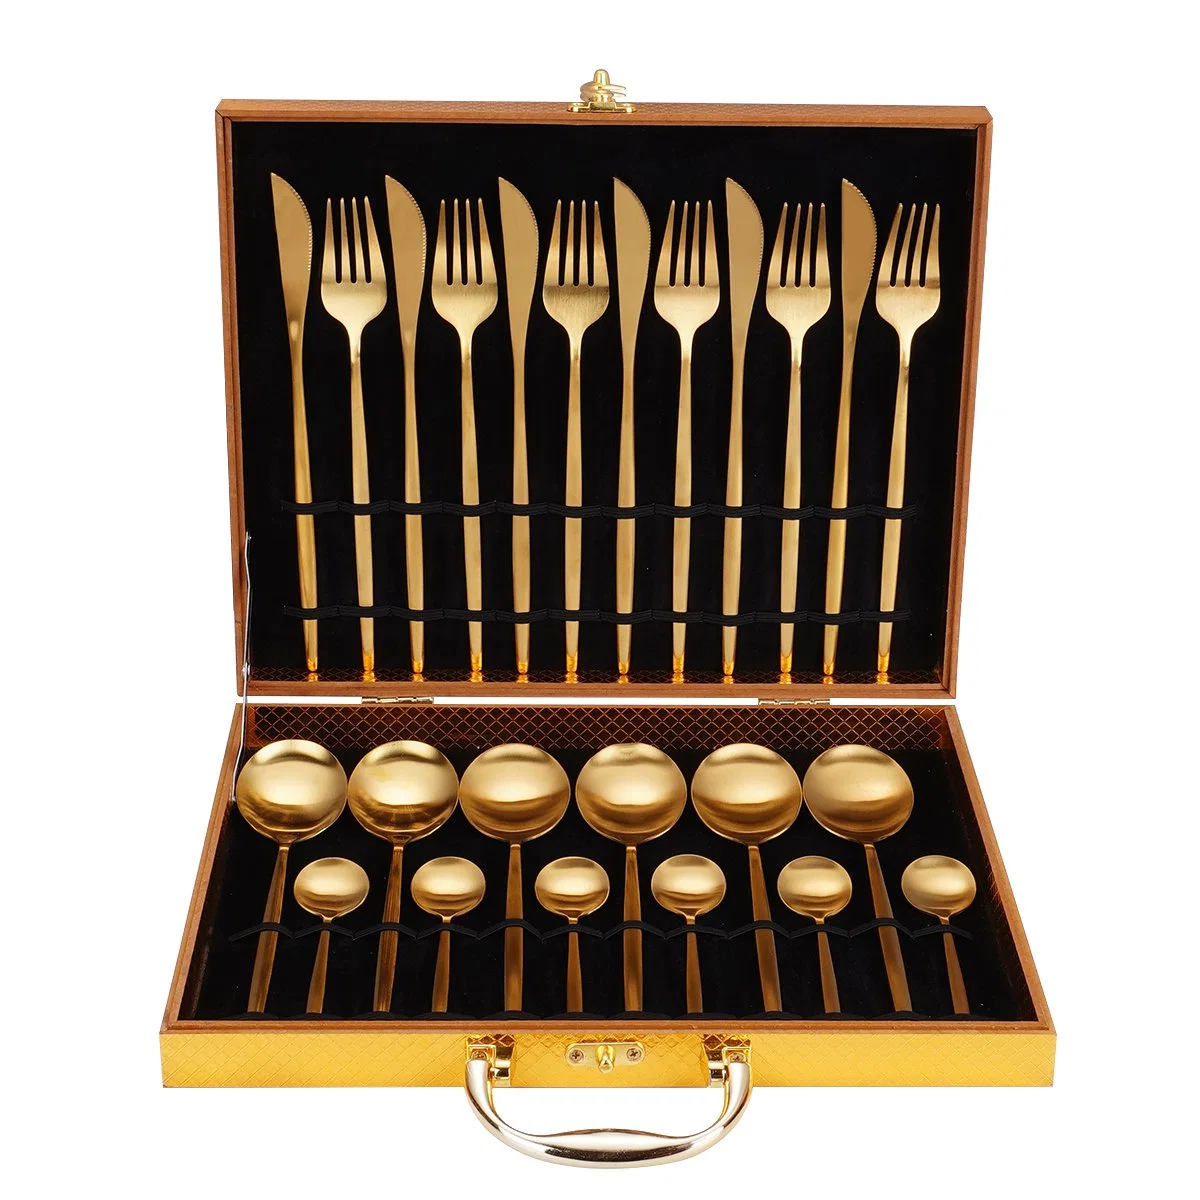 Wholesale Luxury Restaurant Wedding Knife Spoon Fork Gift 24PCS Matte Gold Stainless Steel Cutlery Set with Wooden Box